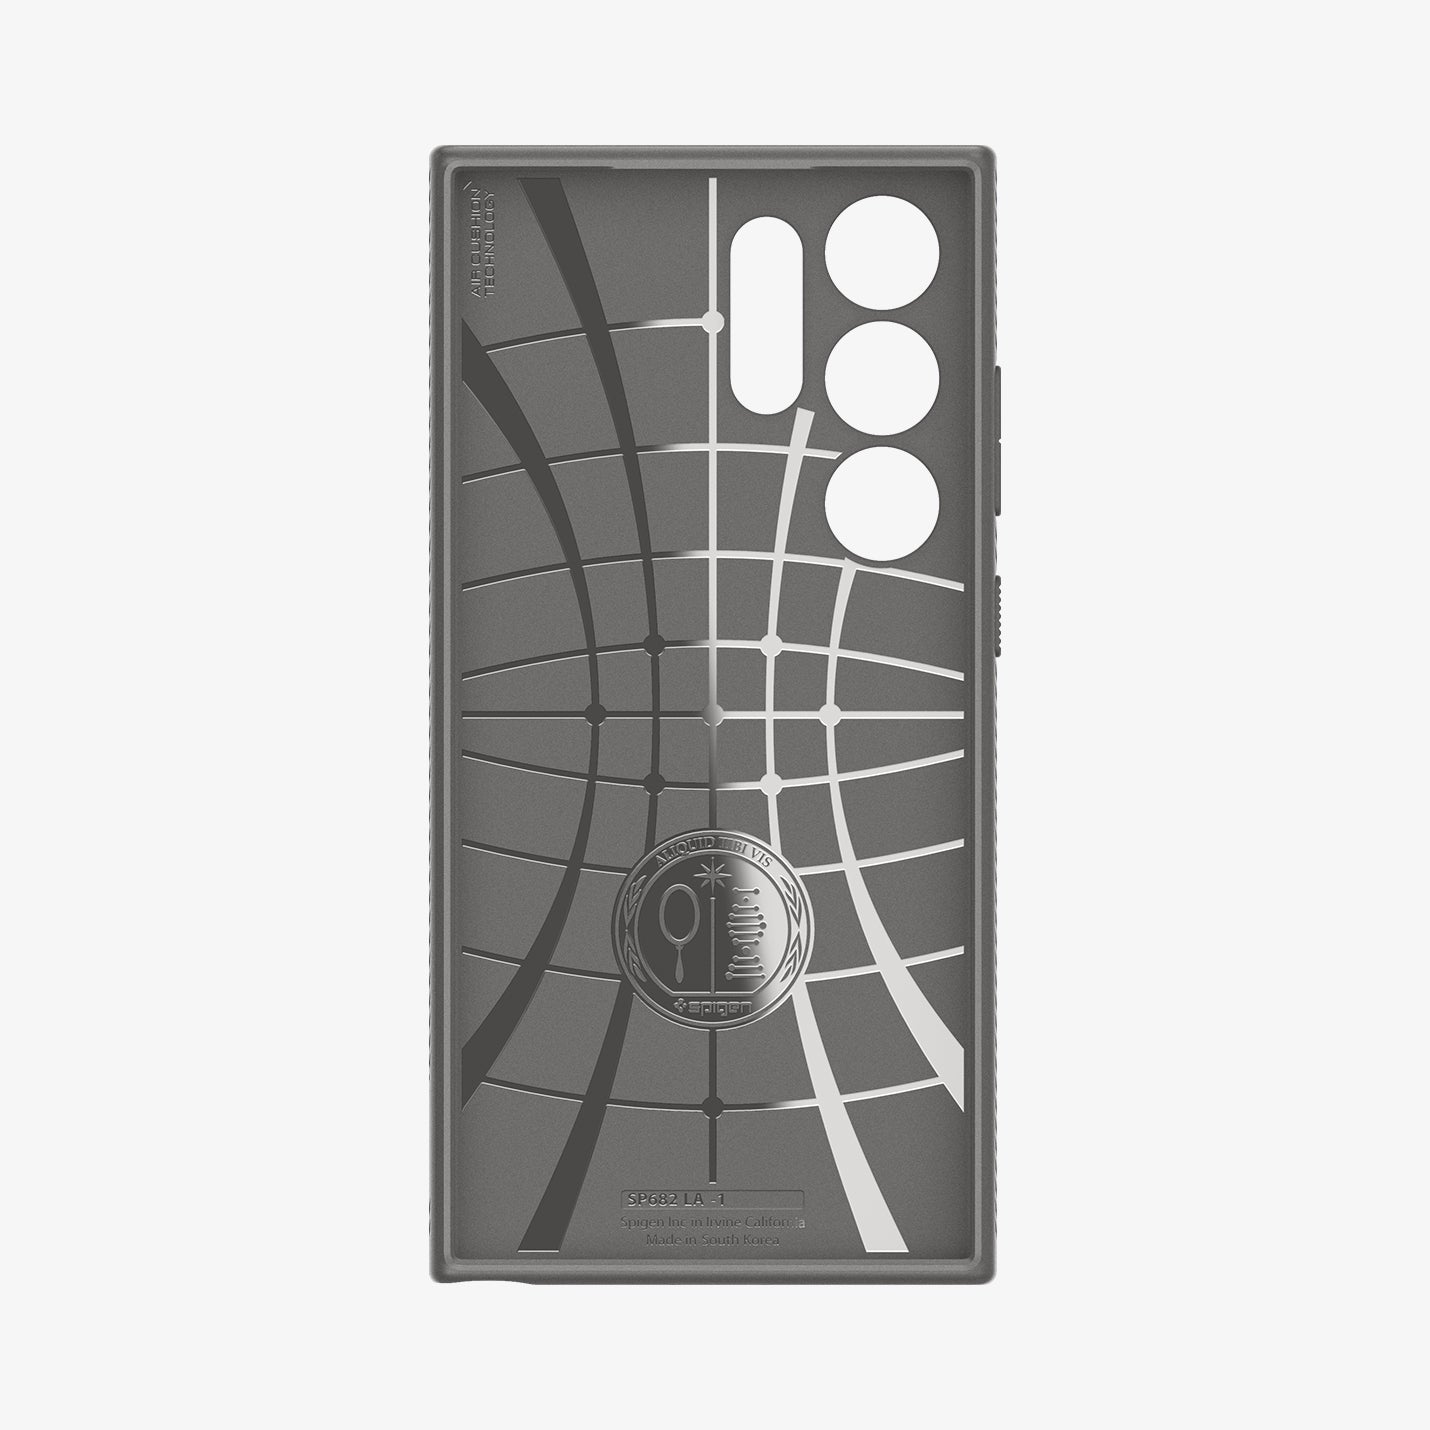 ACS07448 - Galaxy S24 Ultra Case Liquid Air in Granite Gray showing the inner case with spider web pattern